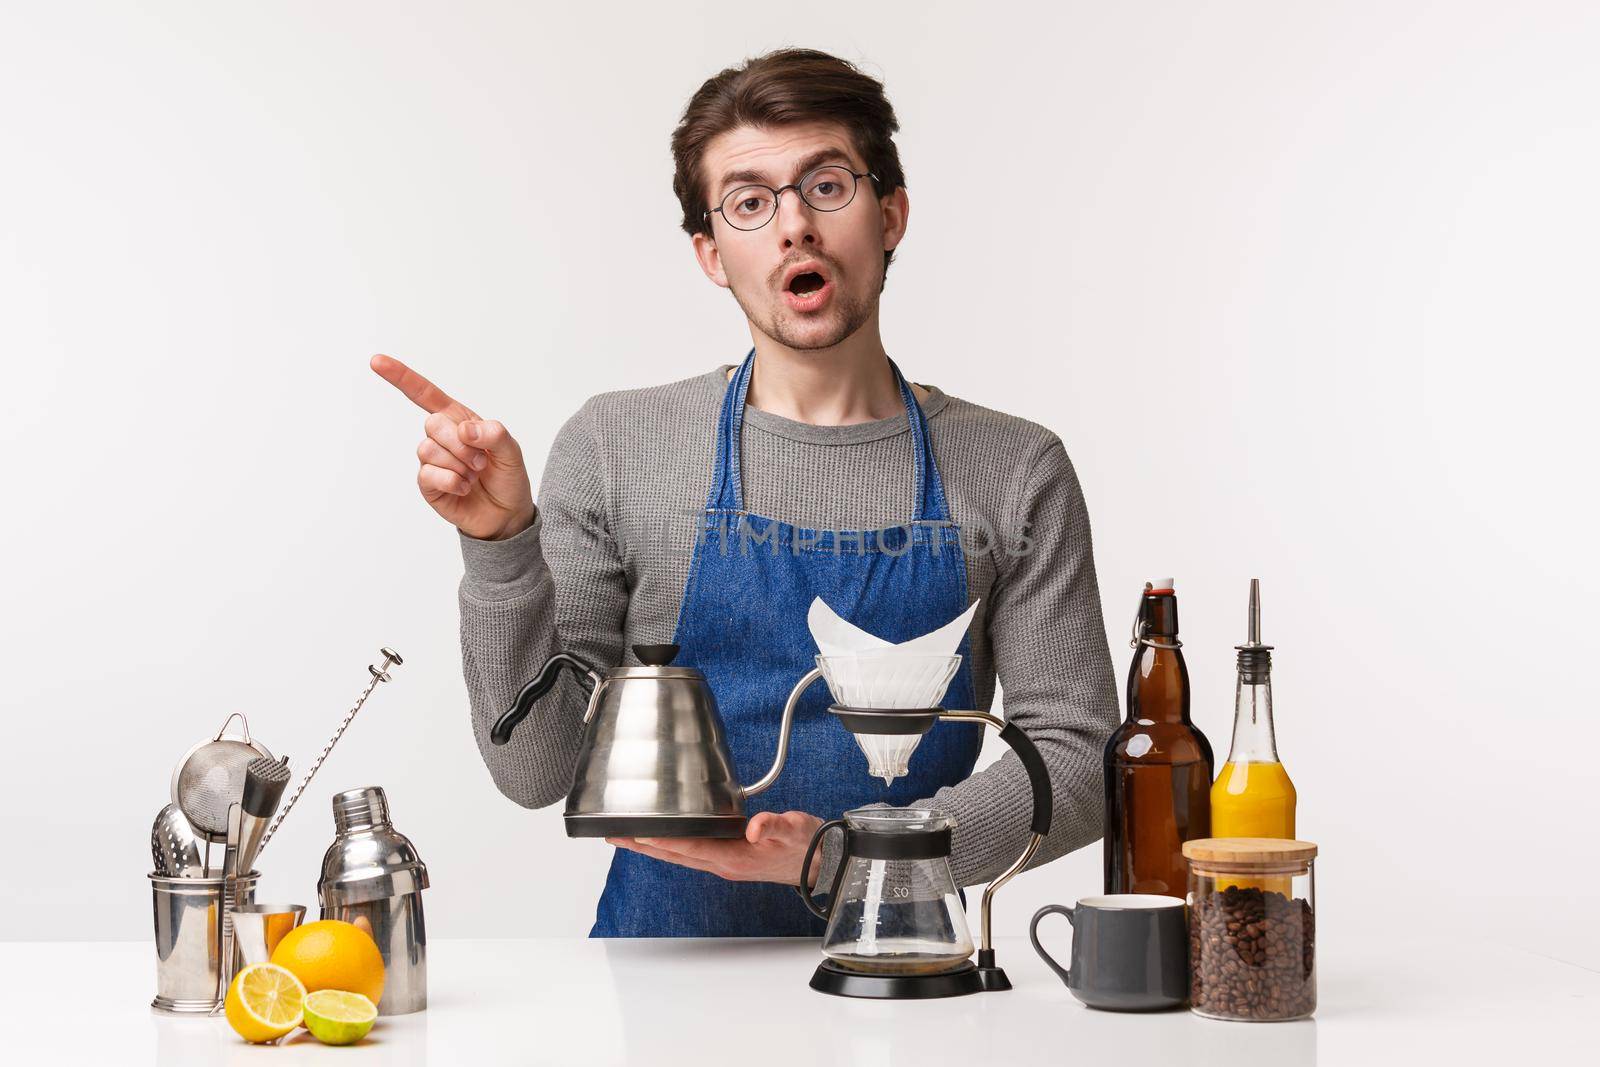 Barista, cafe worker and bartender concept. Portrait of skeptical young man pointing finger left while holding kettle, making filter coffee in chemex, standing bar counter, white background.